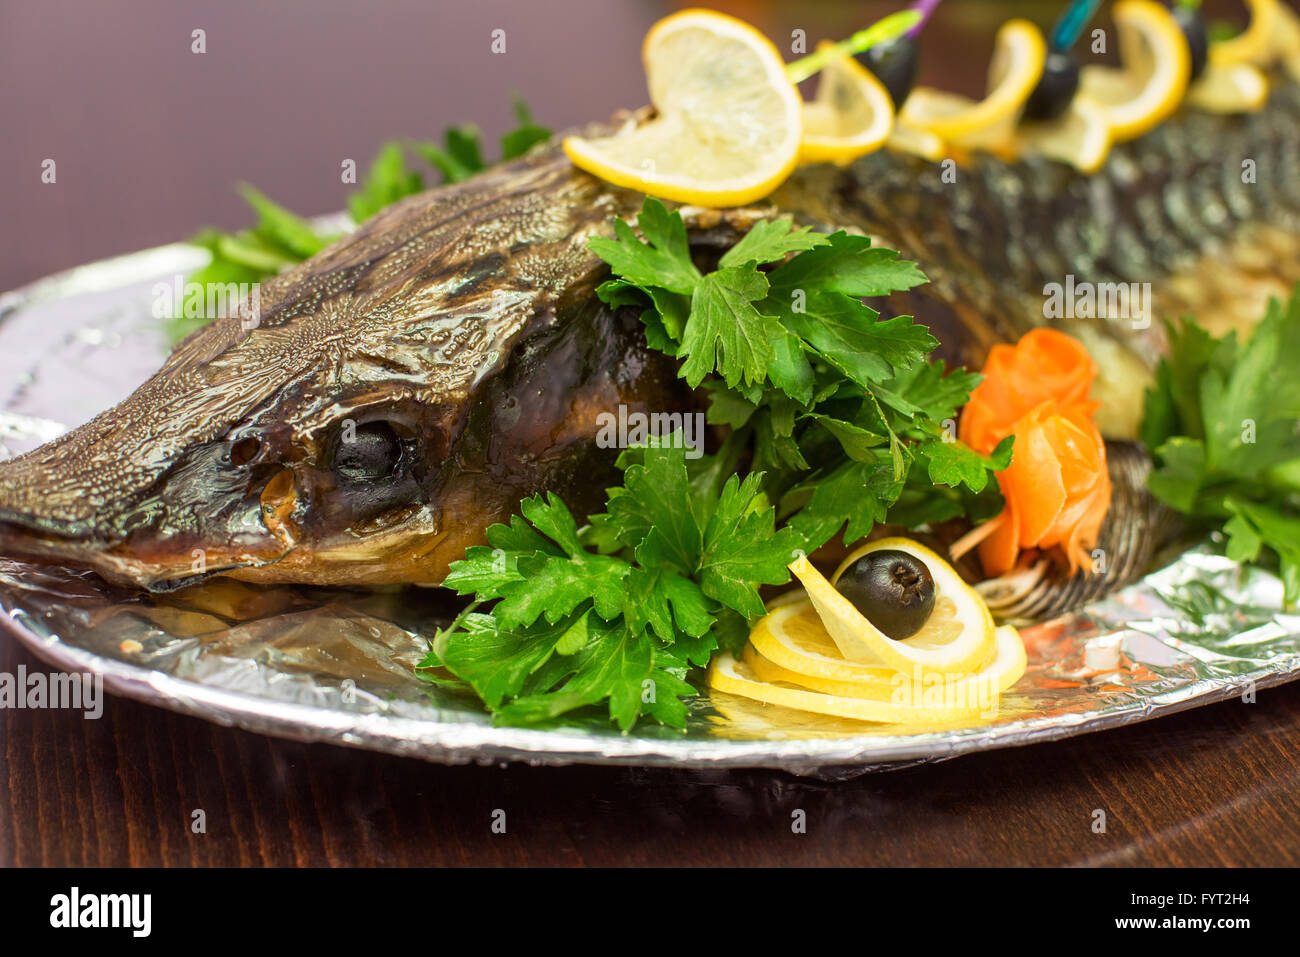 sturgeon baked with greens Stock Photo